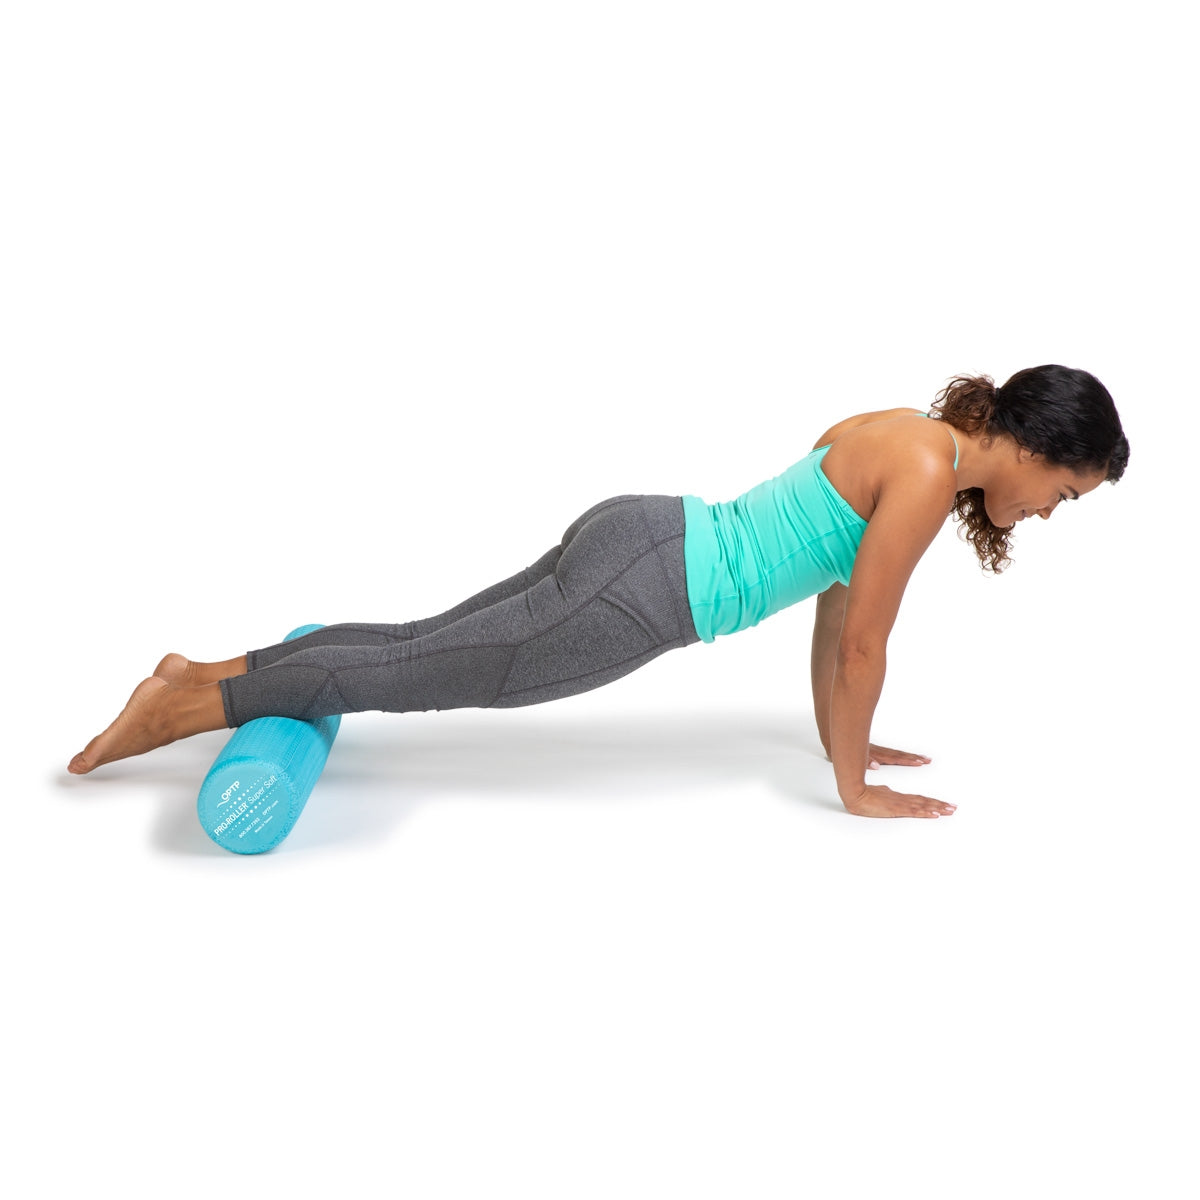 PRO-ROLLER® Soft Pilates Package